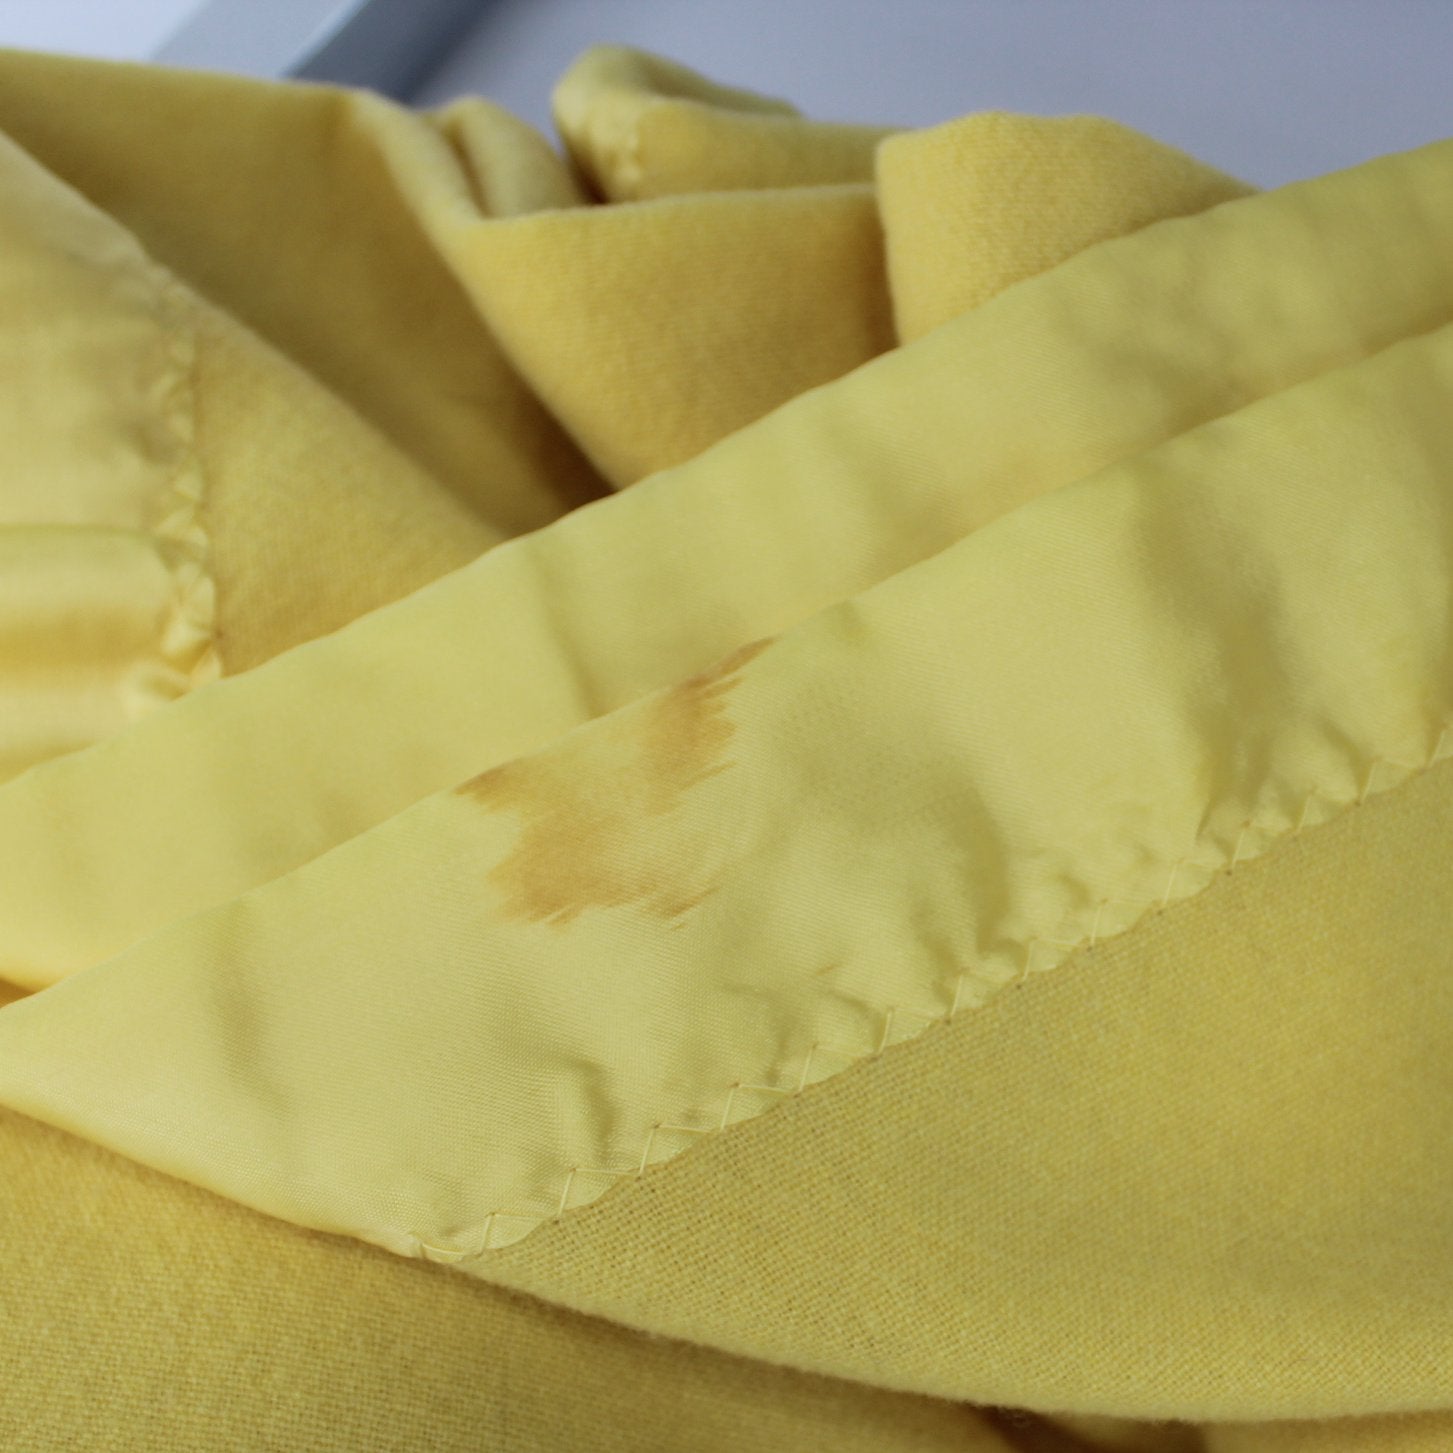 North Star Sheer Wool All Season Yellow Blanket Excellent Vintage closeup of stain